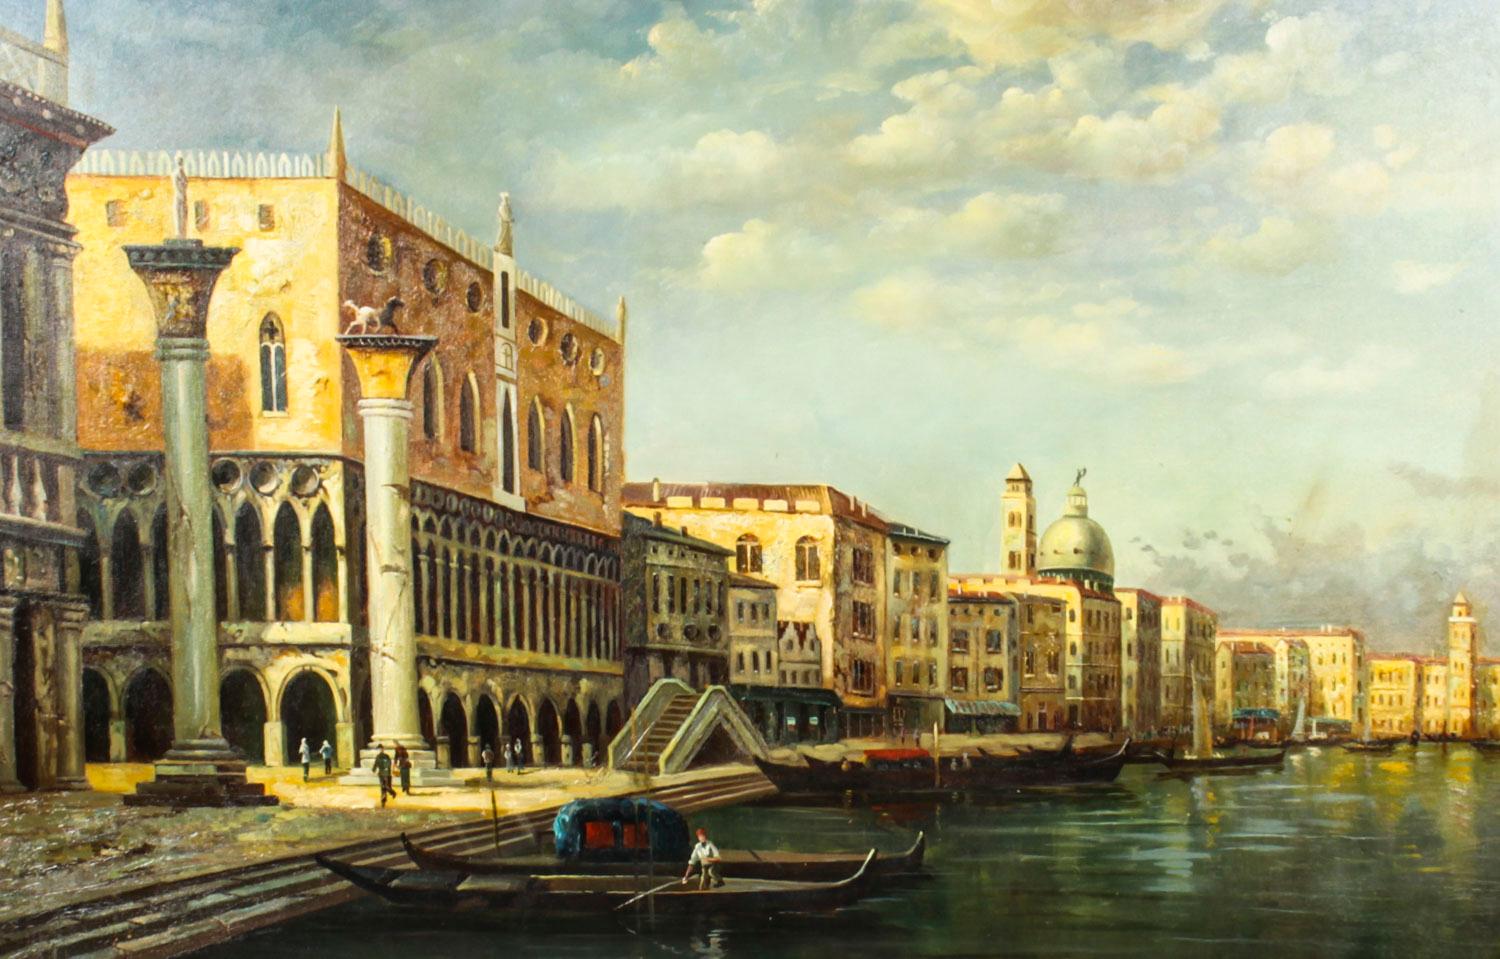 A beautiful oil on canvas painting of the view of The Doges' Palace and Piazza San Marco in Venice, circa mid 20th century in date.

The painting features a beautiful view down the Grand Canal over Piazza San Marco to the Doges Palace and the